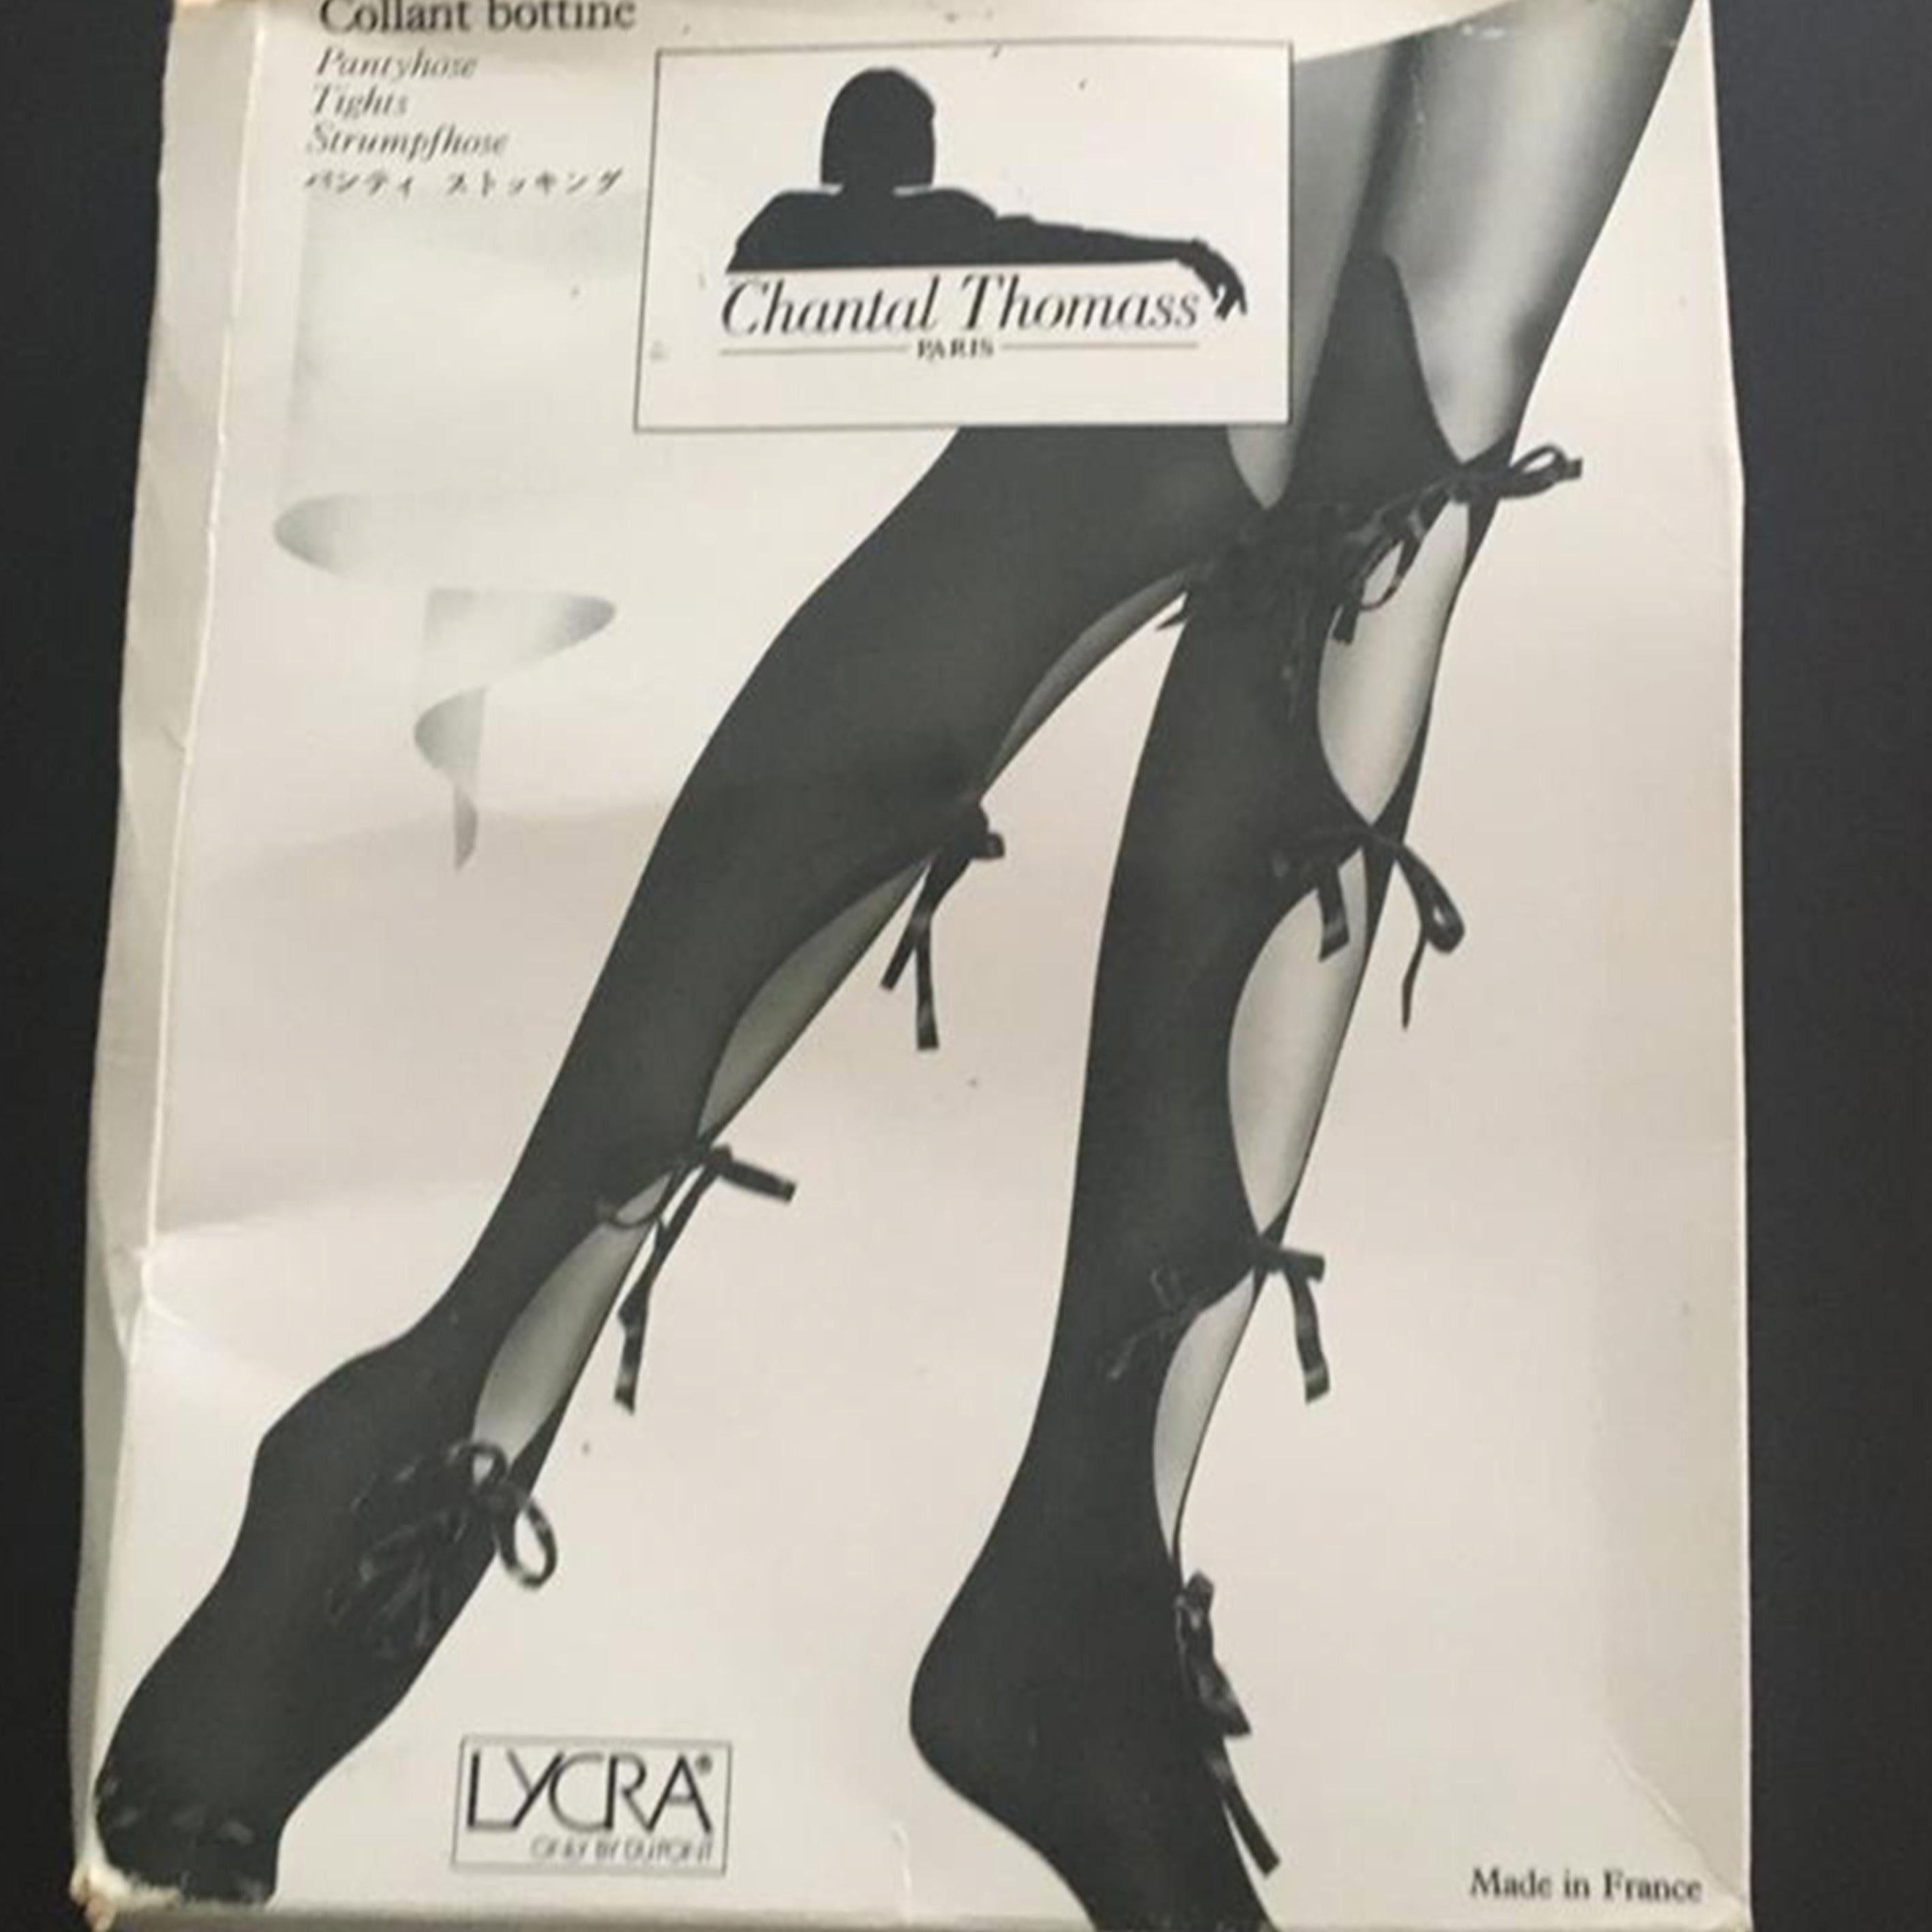 CHANTAL THOMASS SS 1992 Black tights with nodes

Tag: THOMASS

Size 3

Shipping worldwide with tracking number